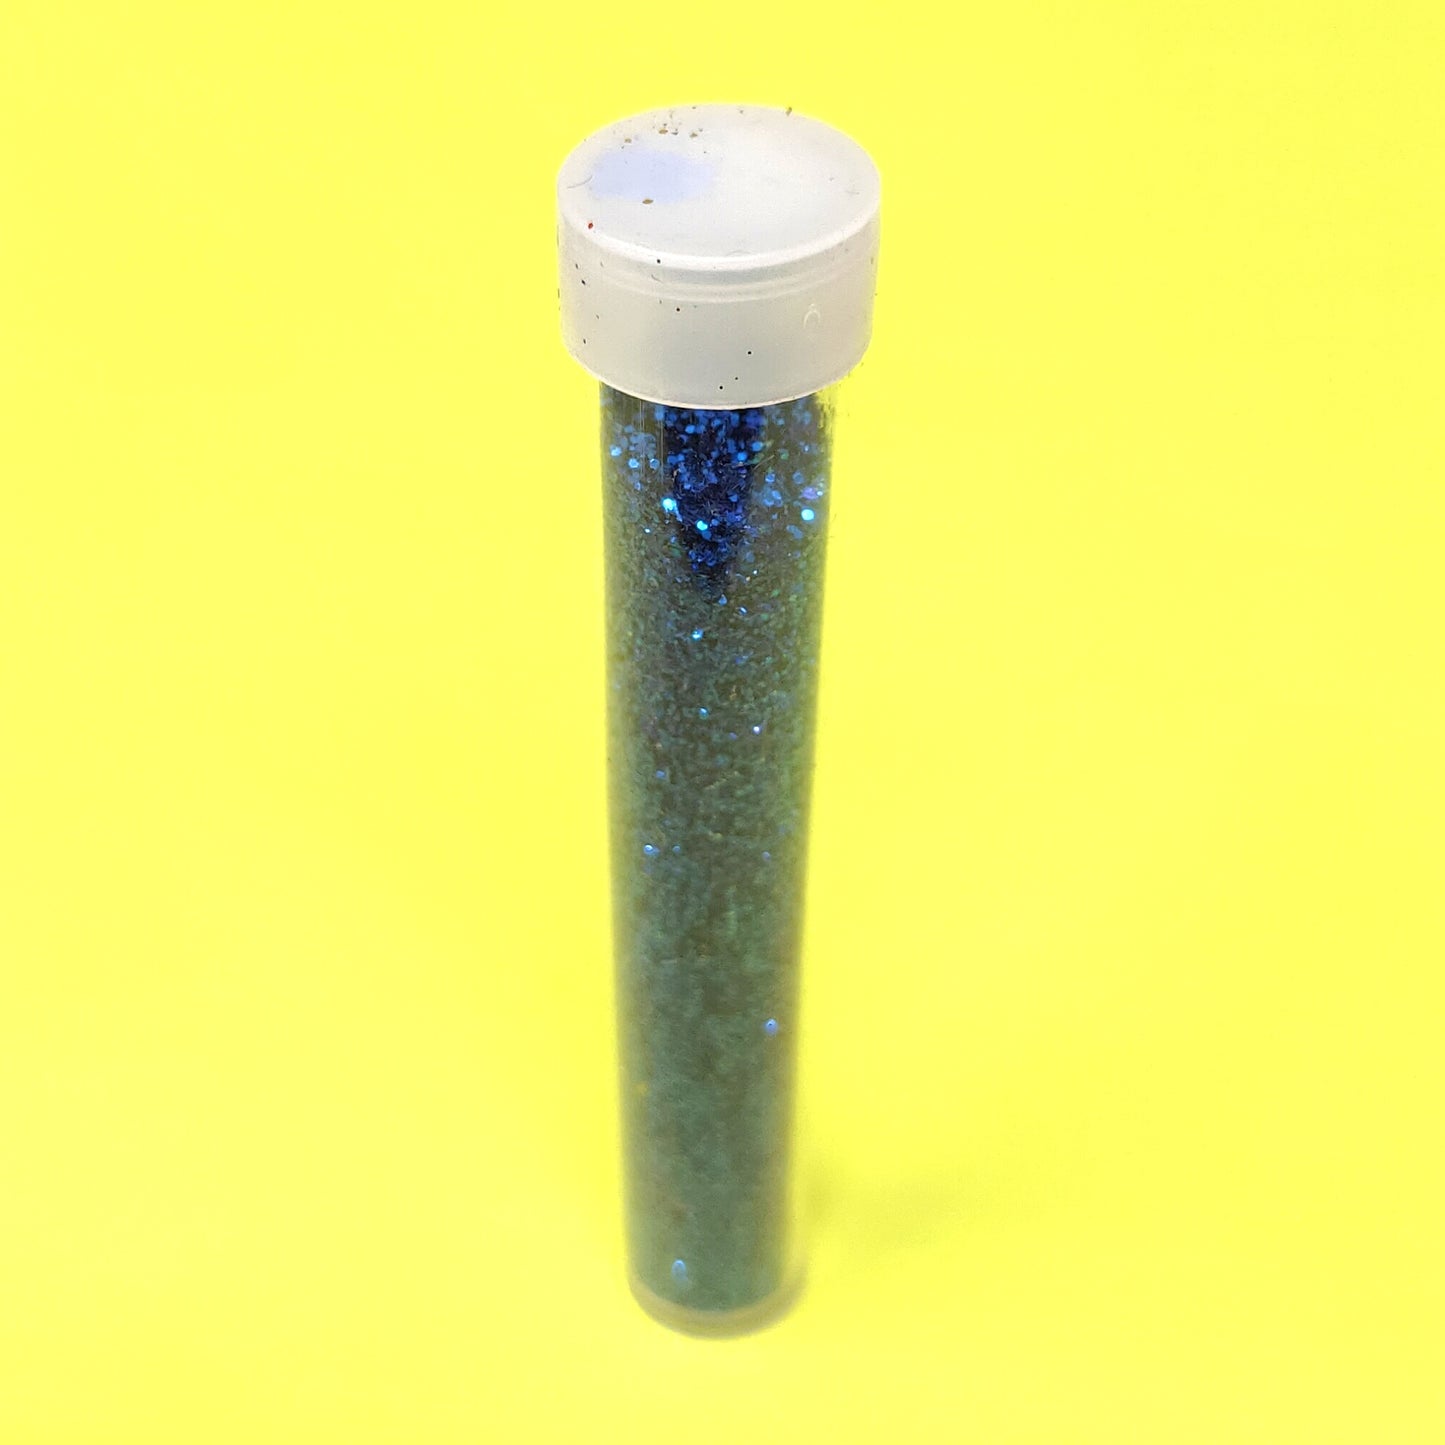 5 gram Blue Glitter for Arts and Crafts, Scrapbooking, Paper Decorations and Other Activities (001)